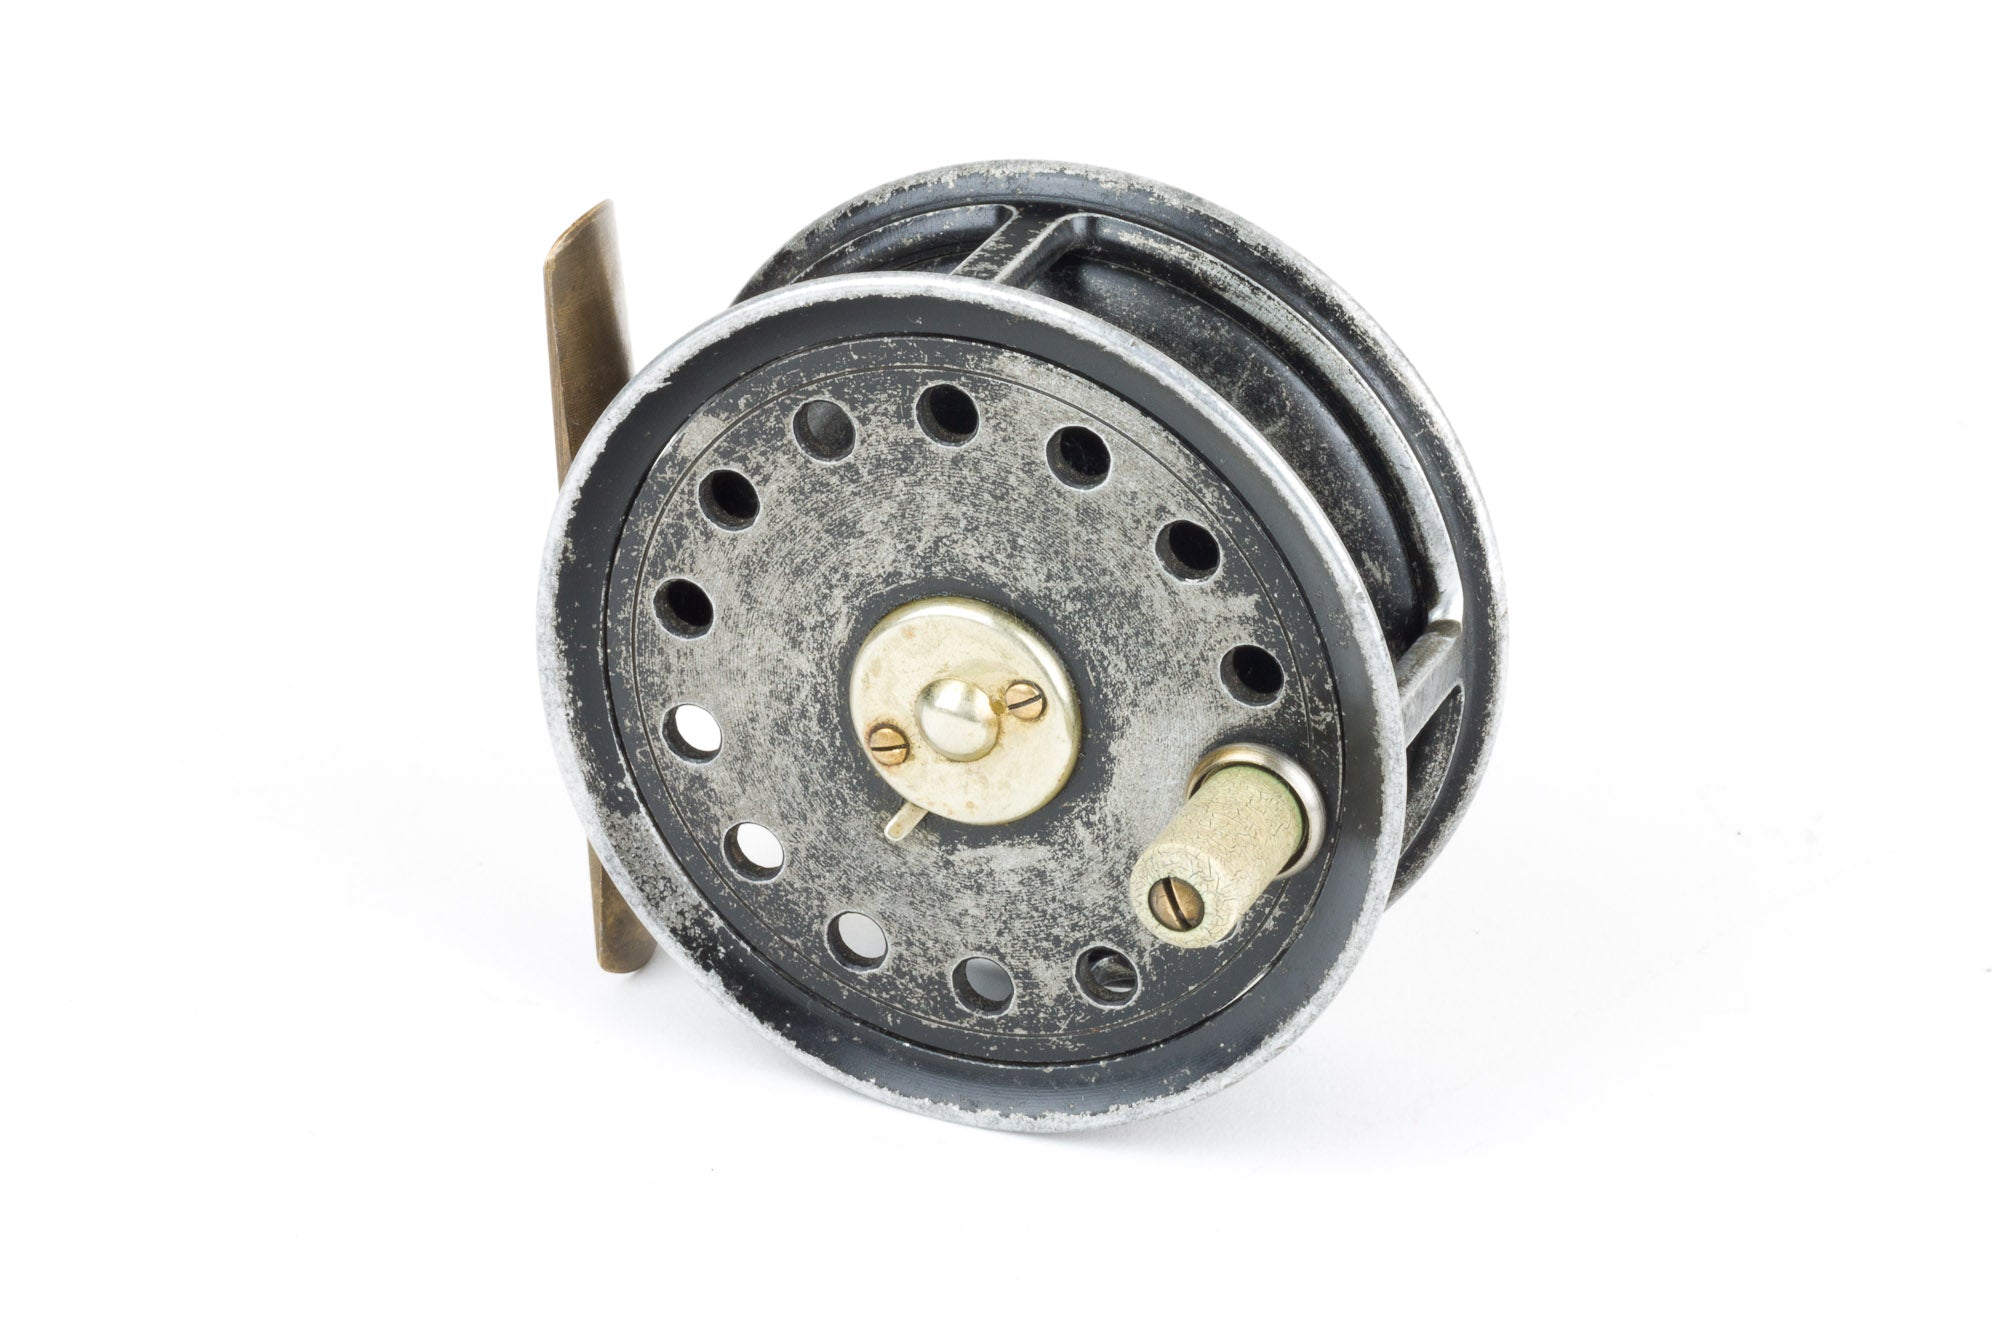 J.W. Young / Allcocks - 3 Fly Reel